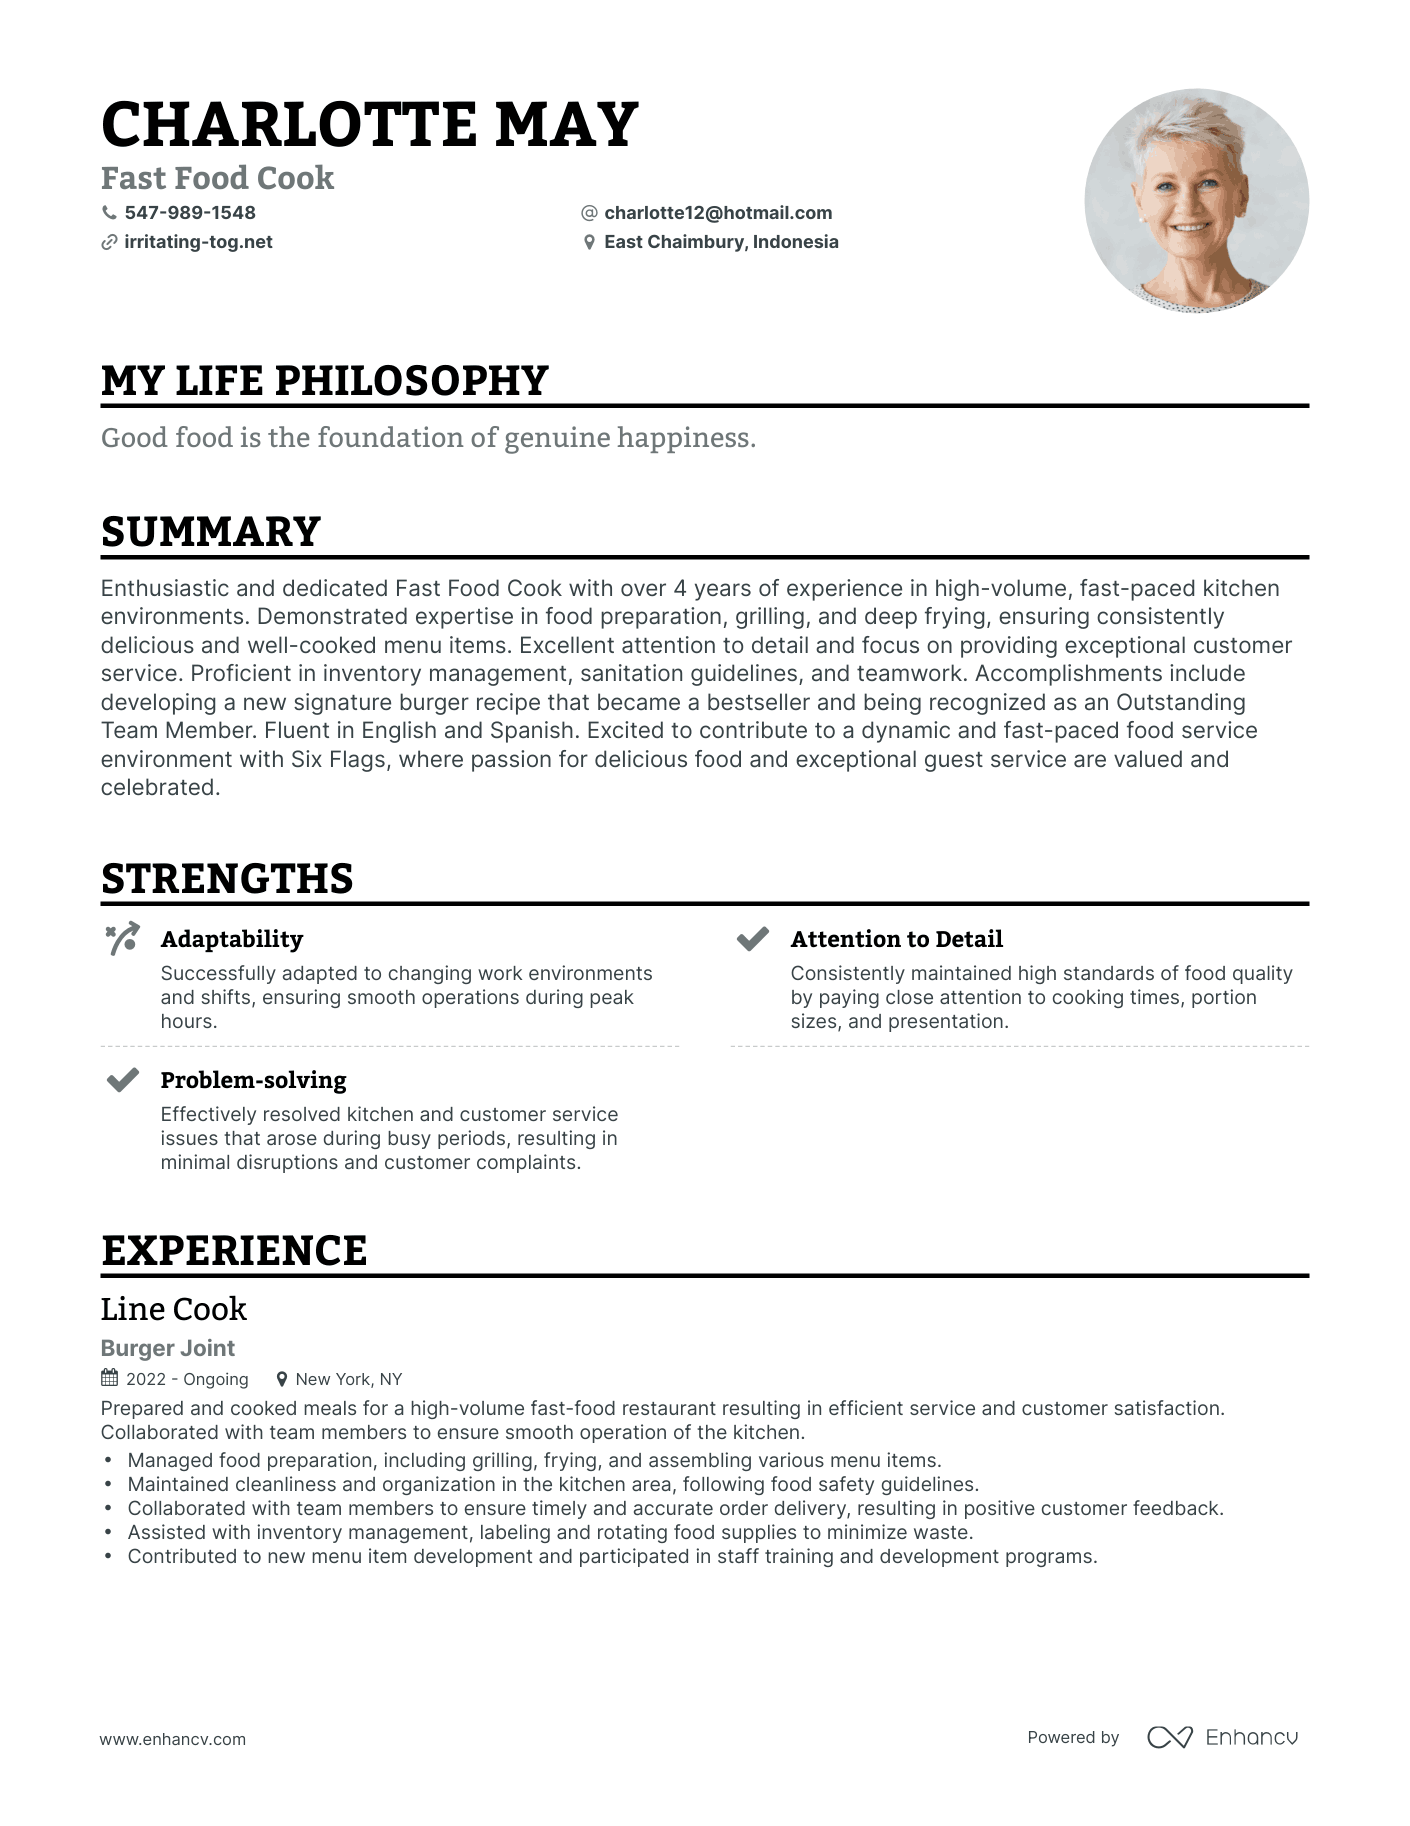 Creative Fast Food Cook Resume Example